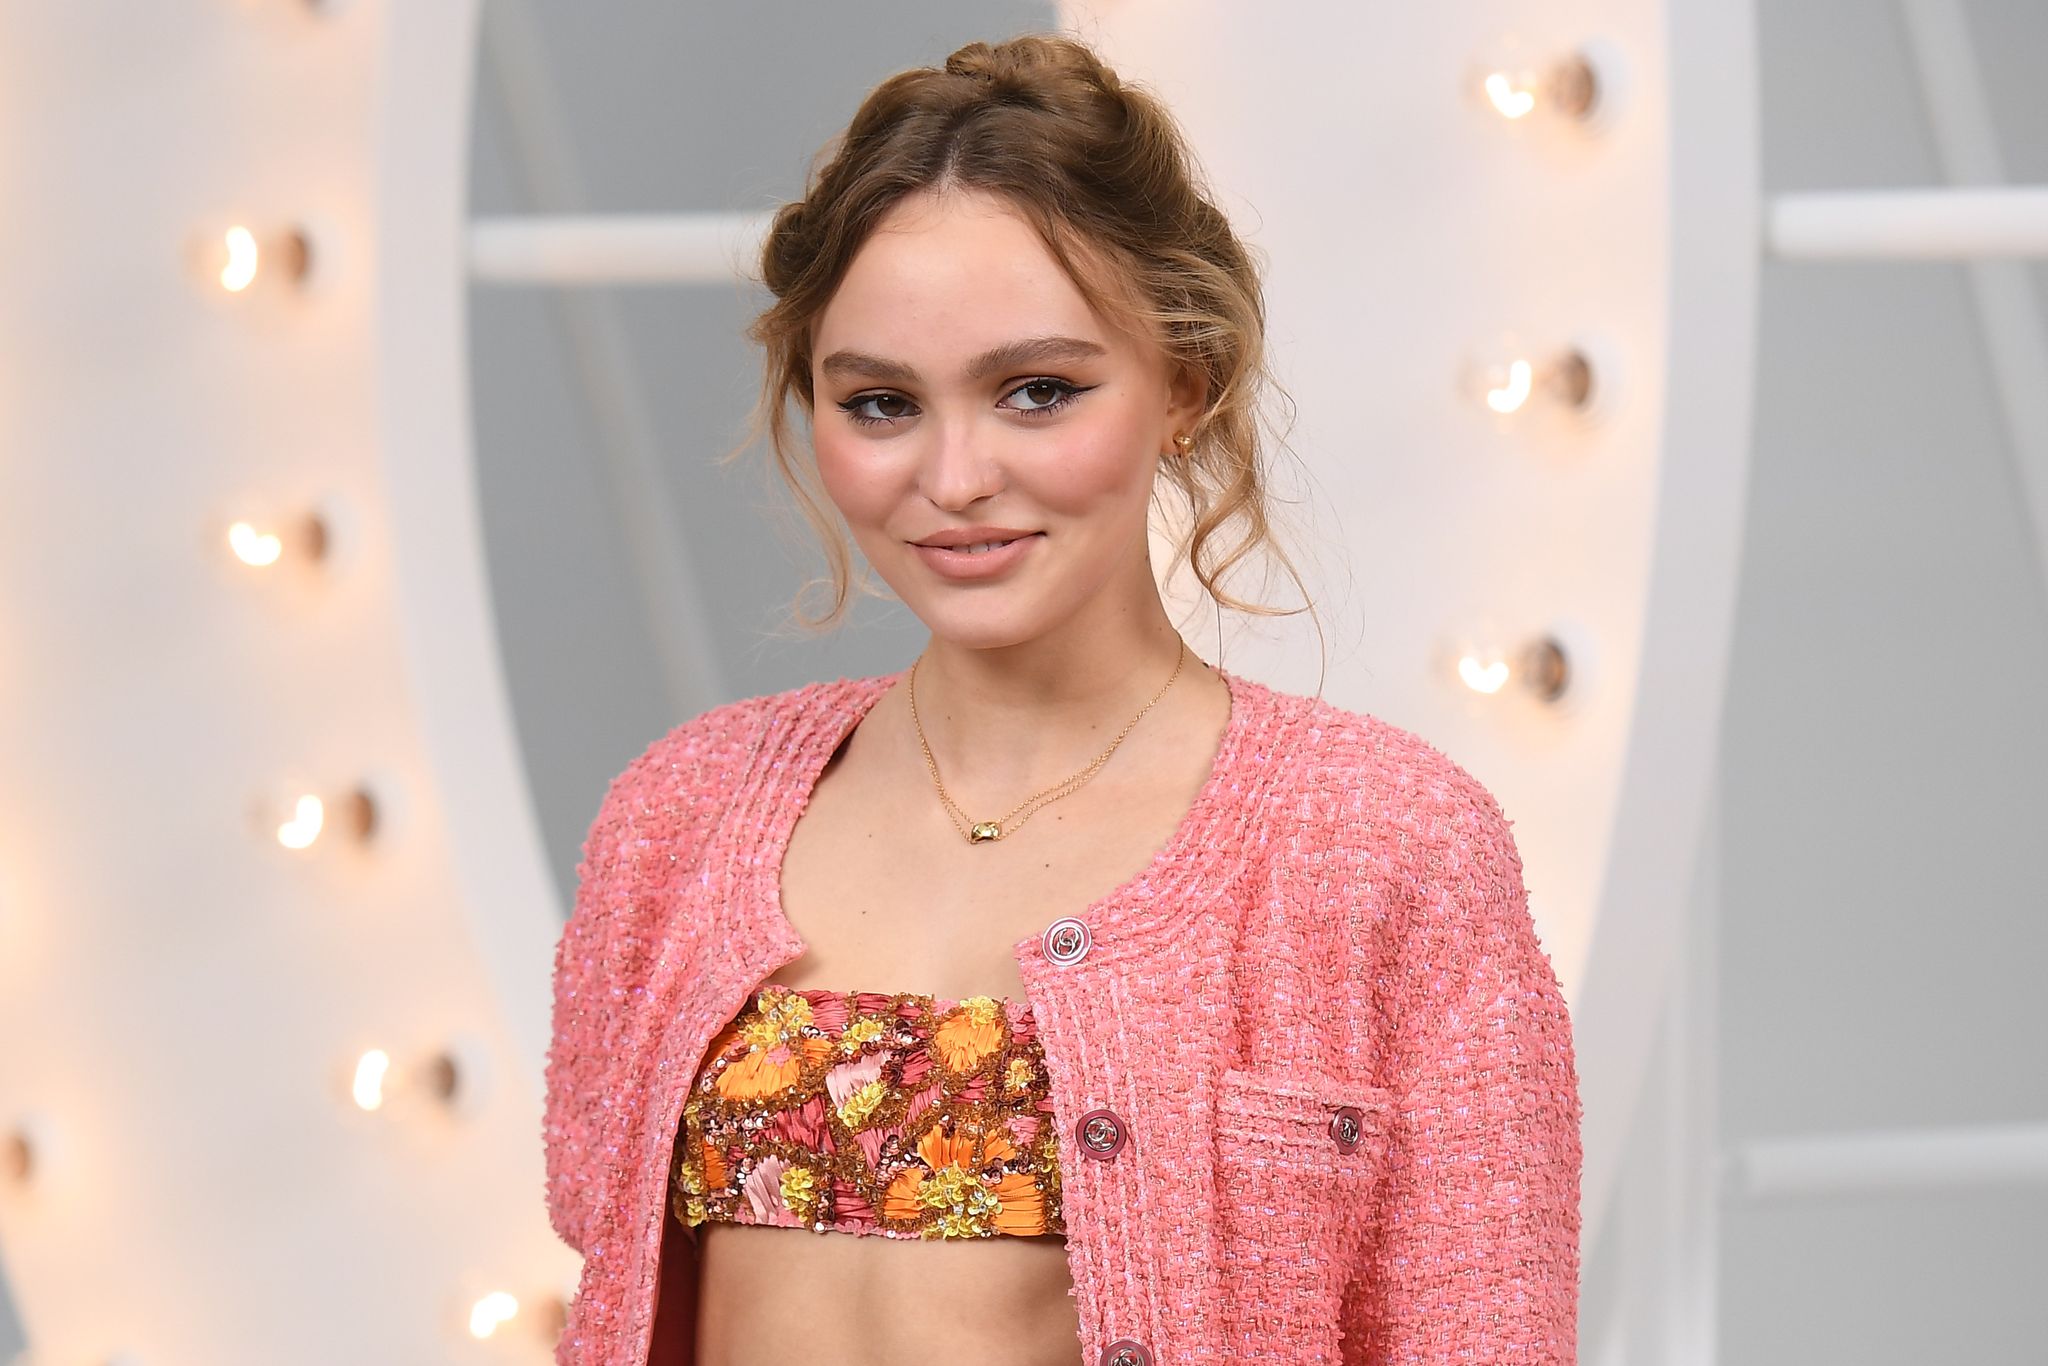 Lily-Rose Depp during the Chanel Womenswear Spring/Summer 2021 show as part of Paris Fashion Week on October 06, 2020 in Paris, France. | Source: Getty Images